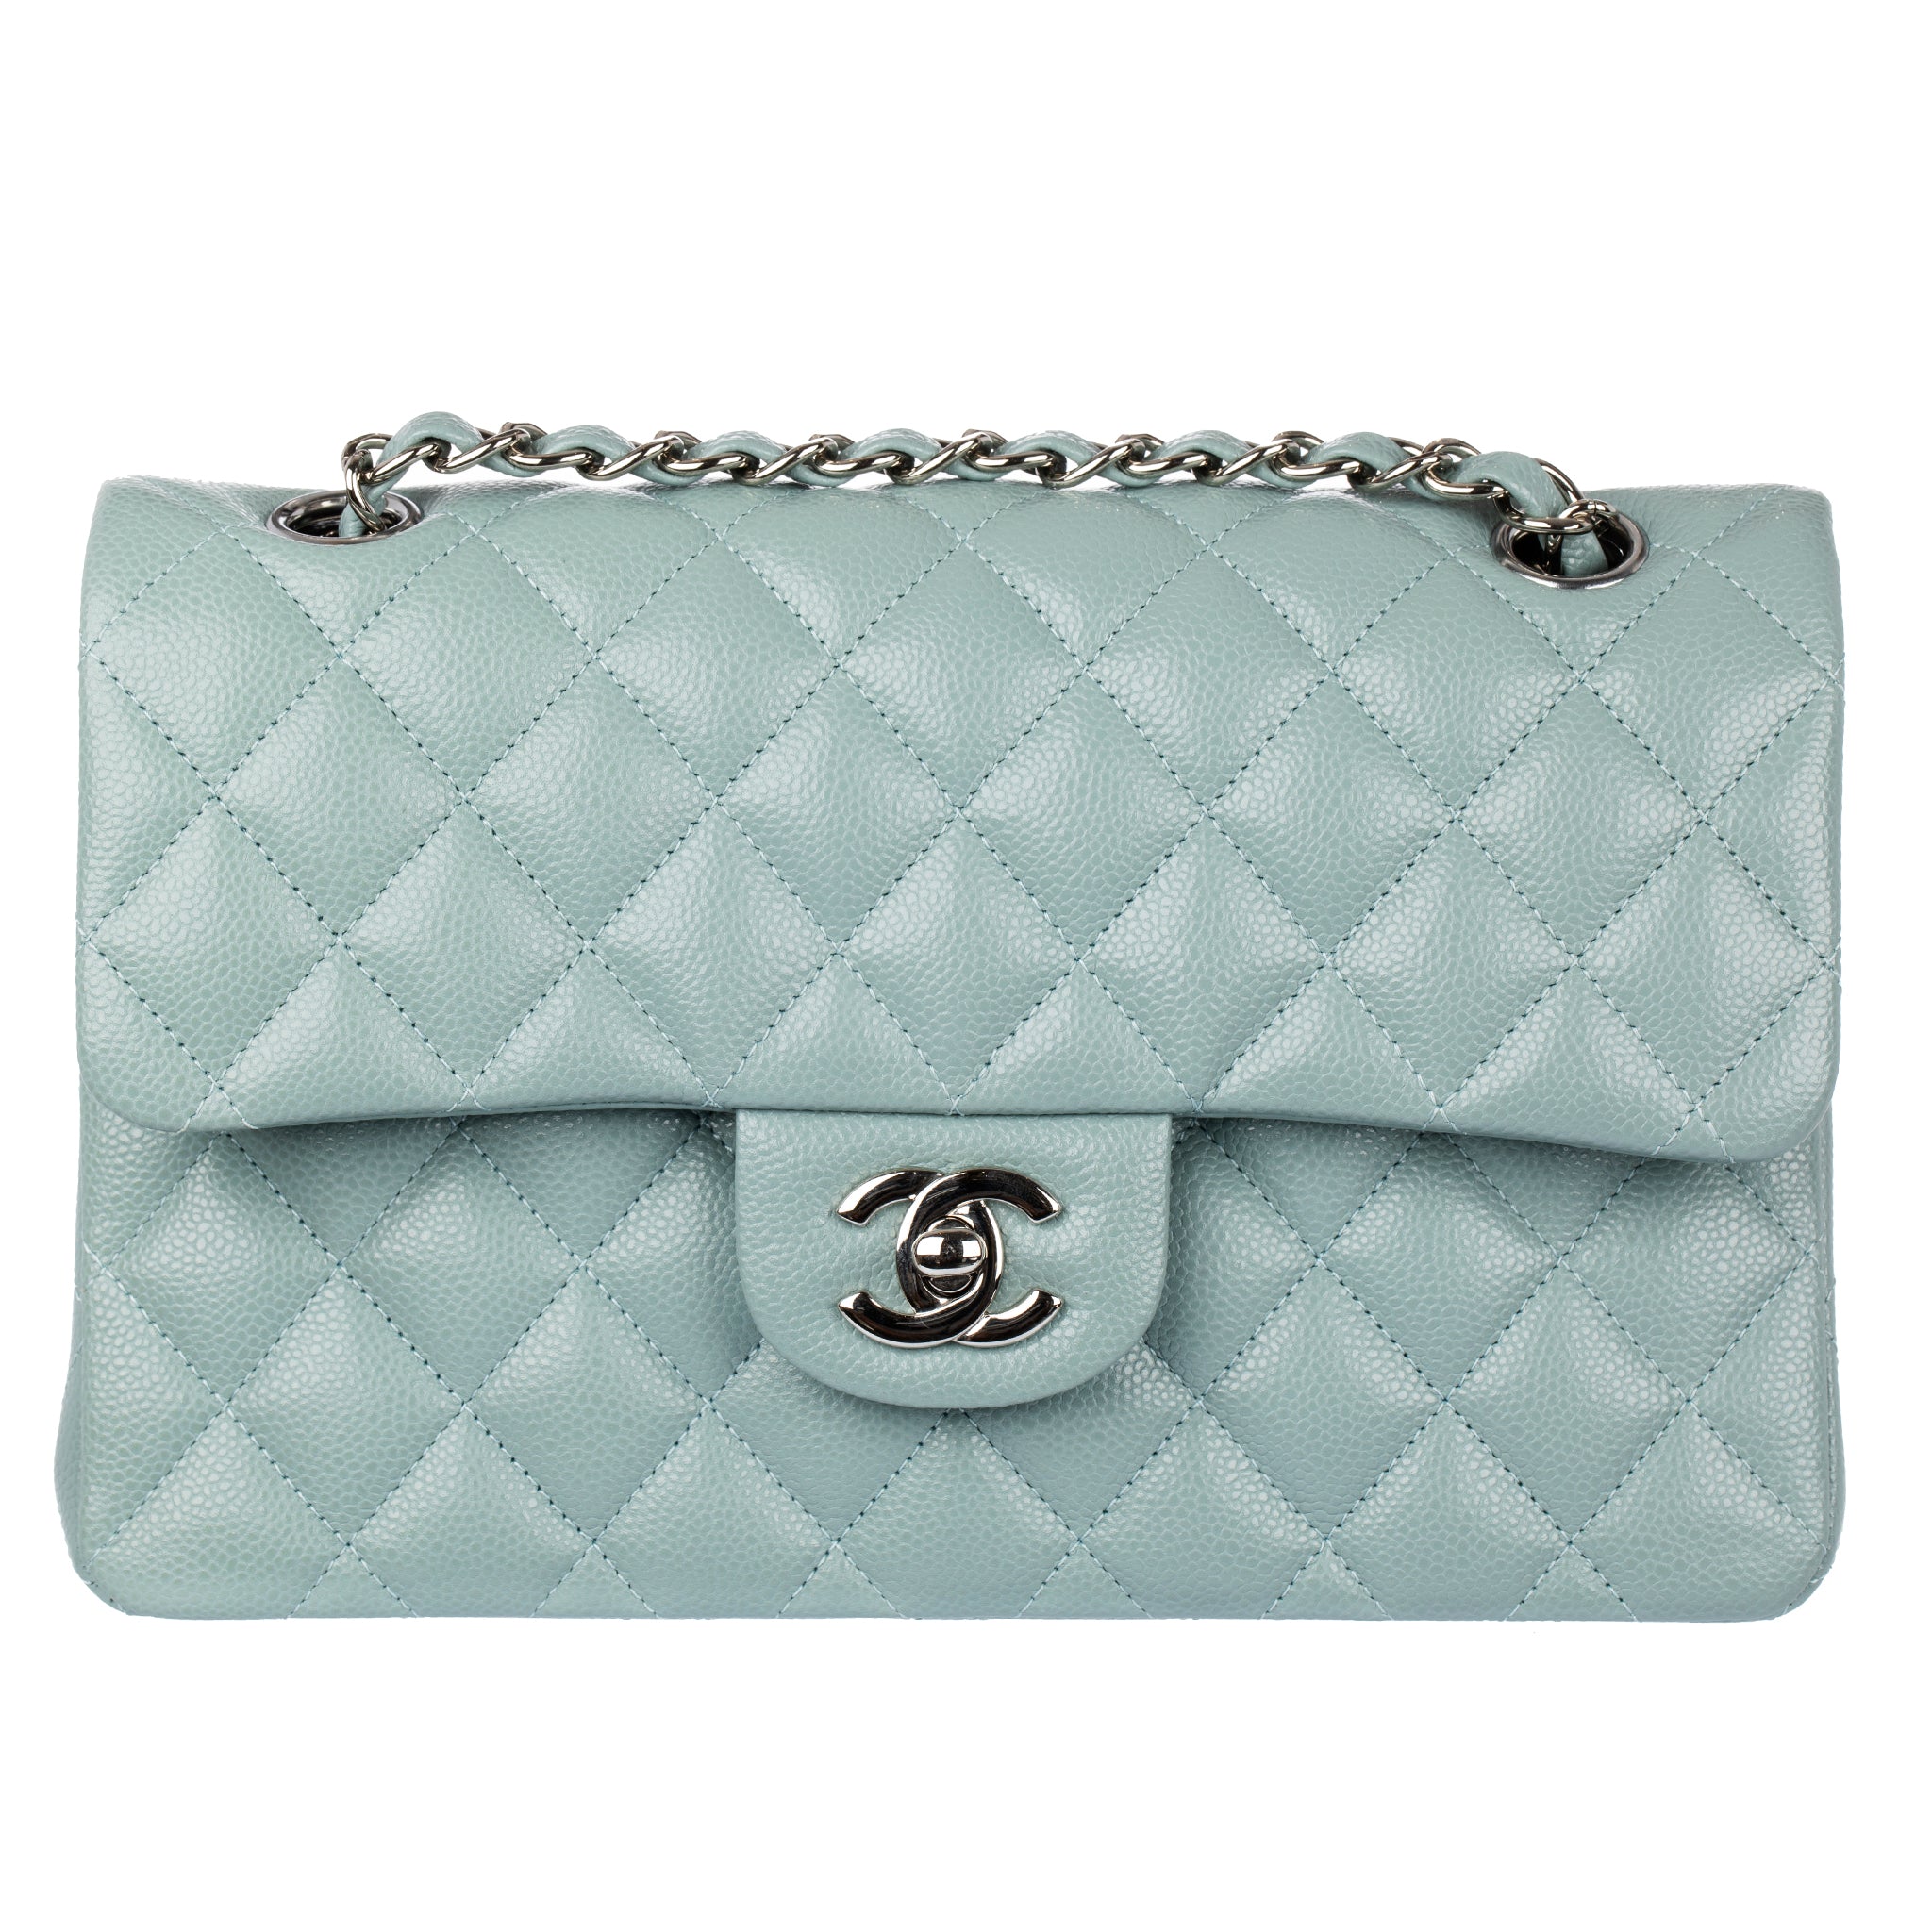 Chanel Small Double Classic Flap Bag Dusty Blue Caviar Leather Silver